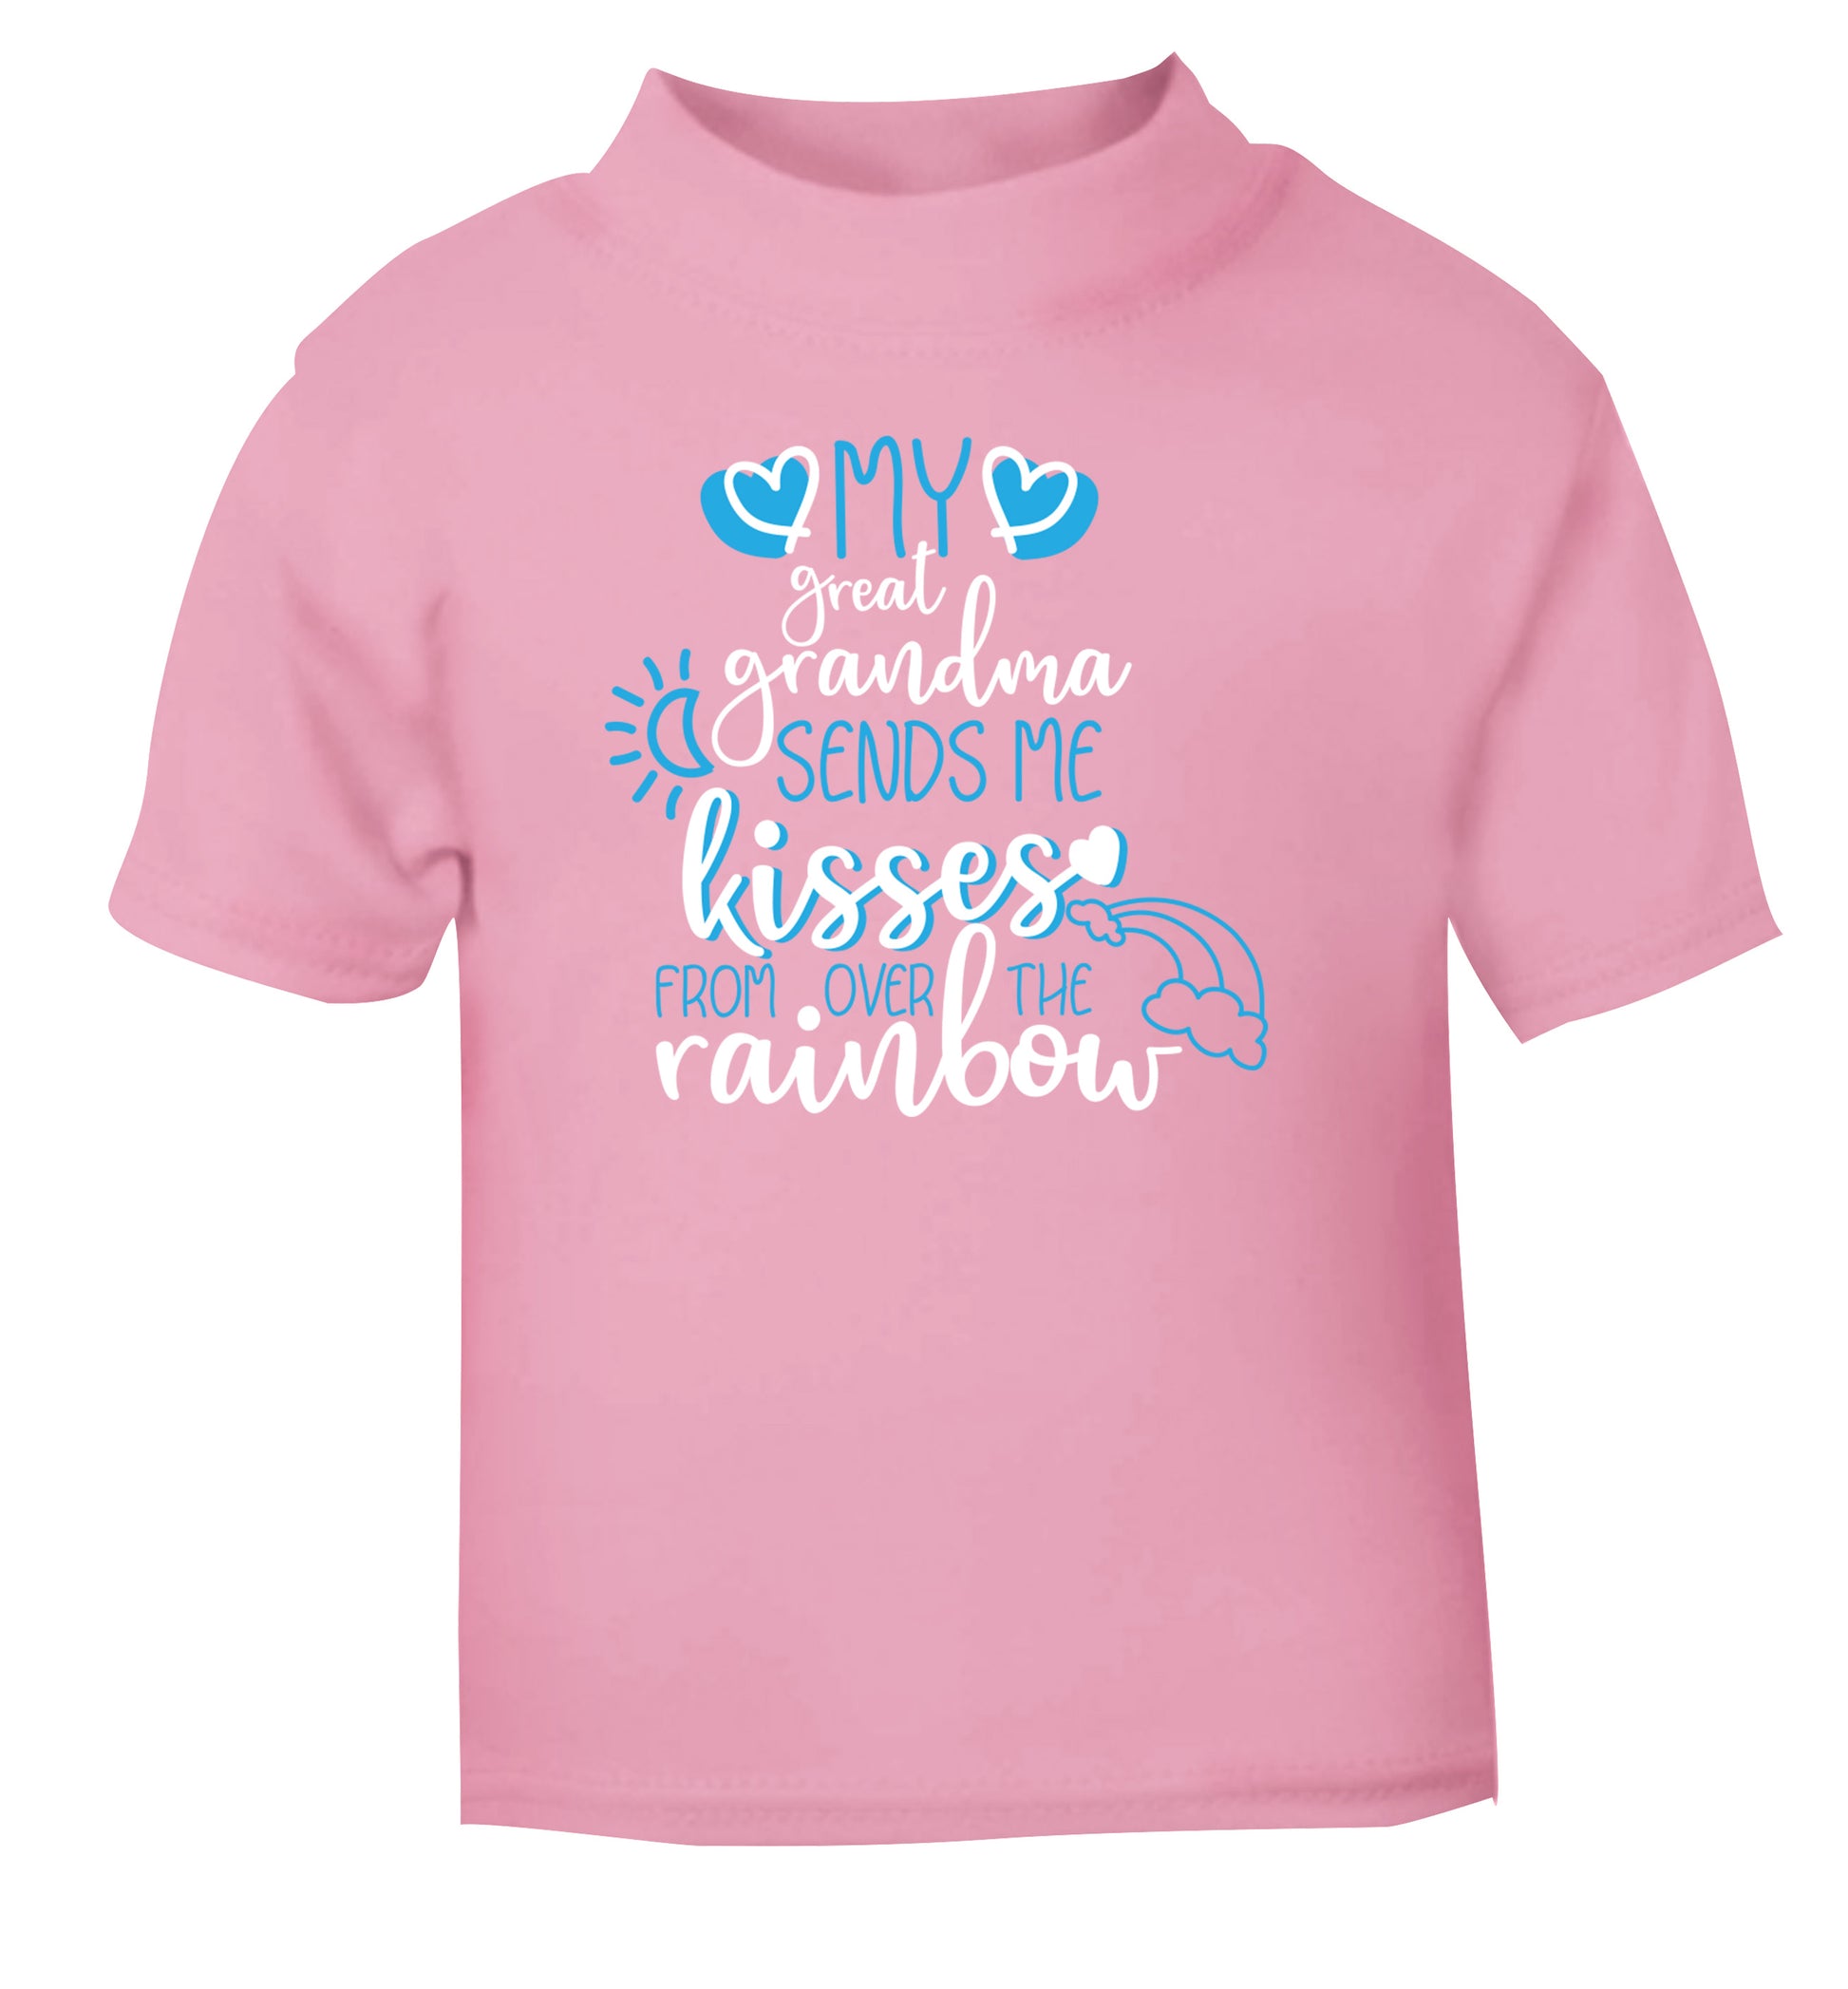 My great grandma sends me kisses from over the rainbow light pink Baby Toddler Tshirt 2 Years